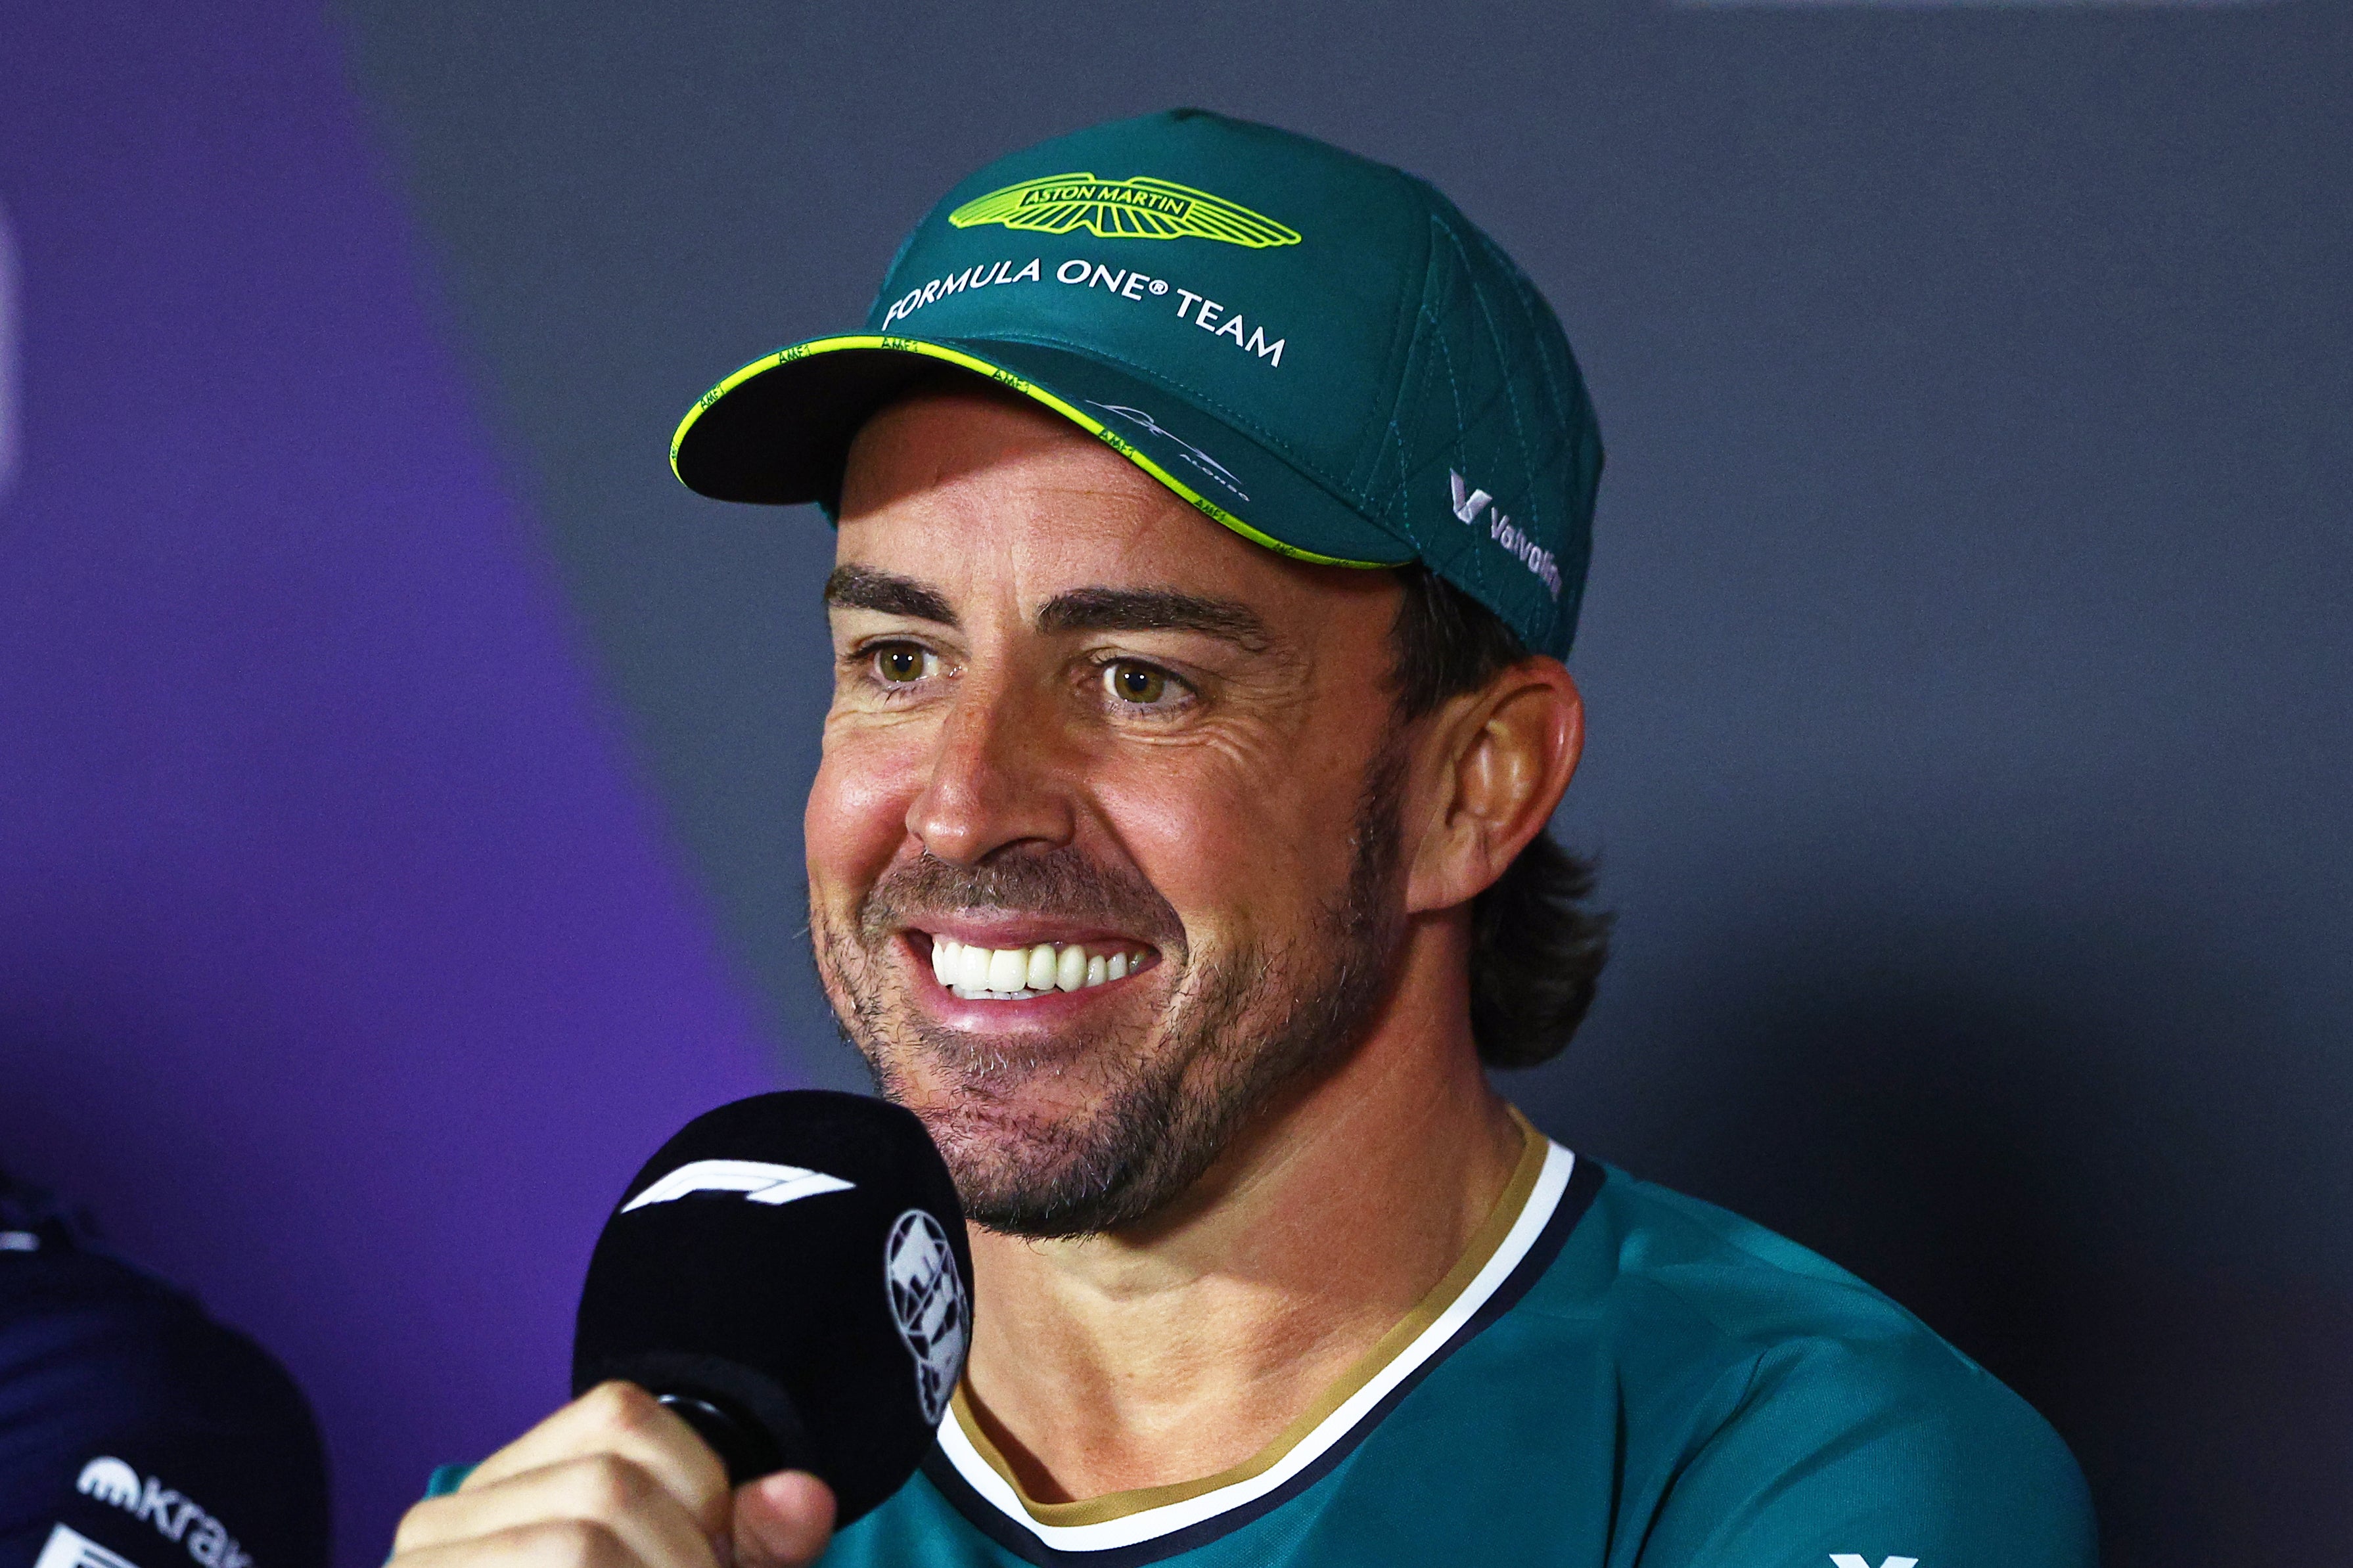 Fernando Alonso has signed a new multi-year deal to stay with Aston Martin